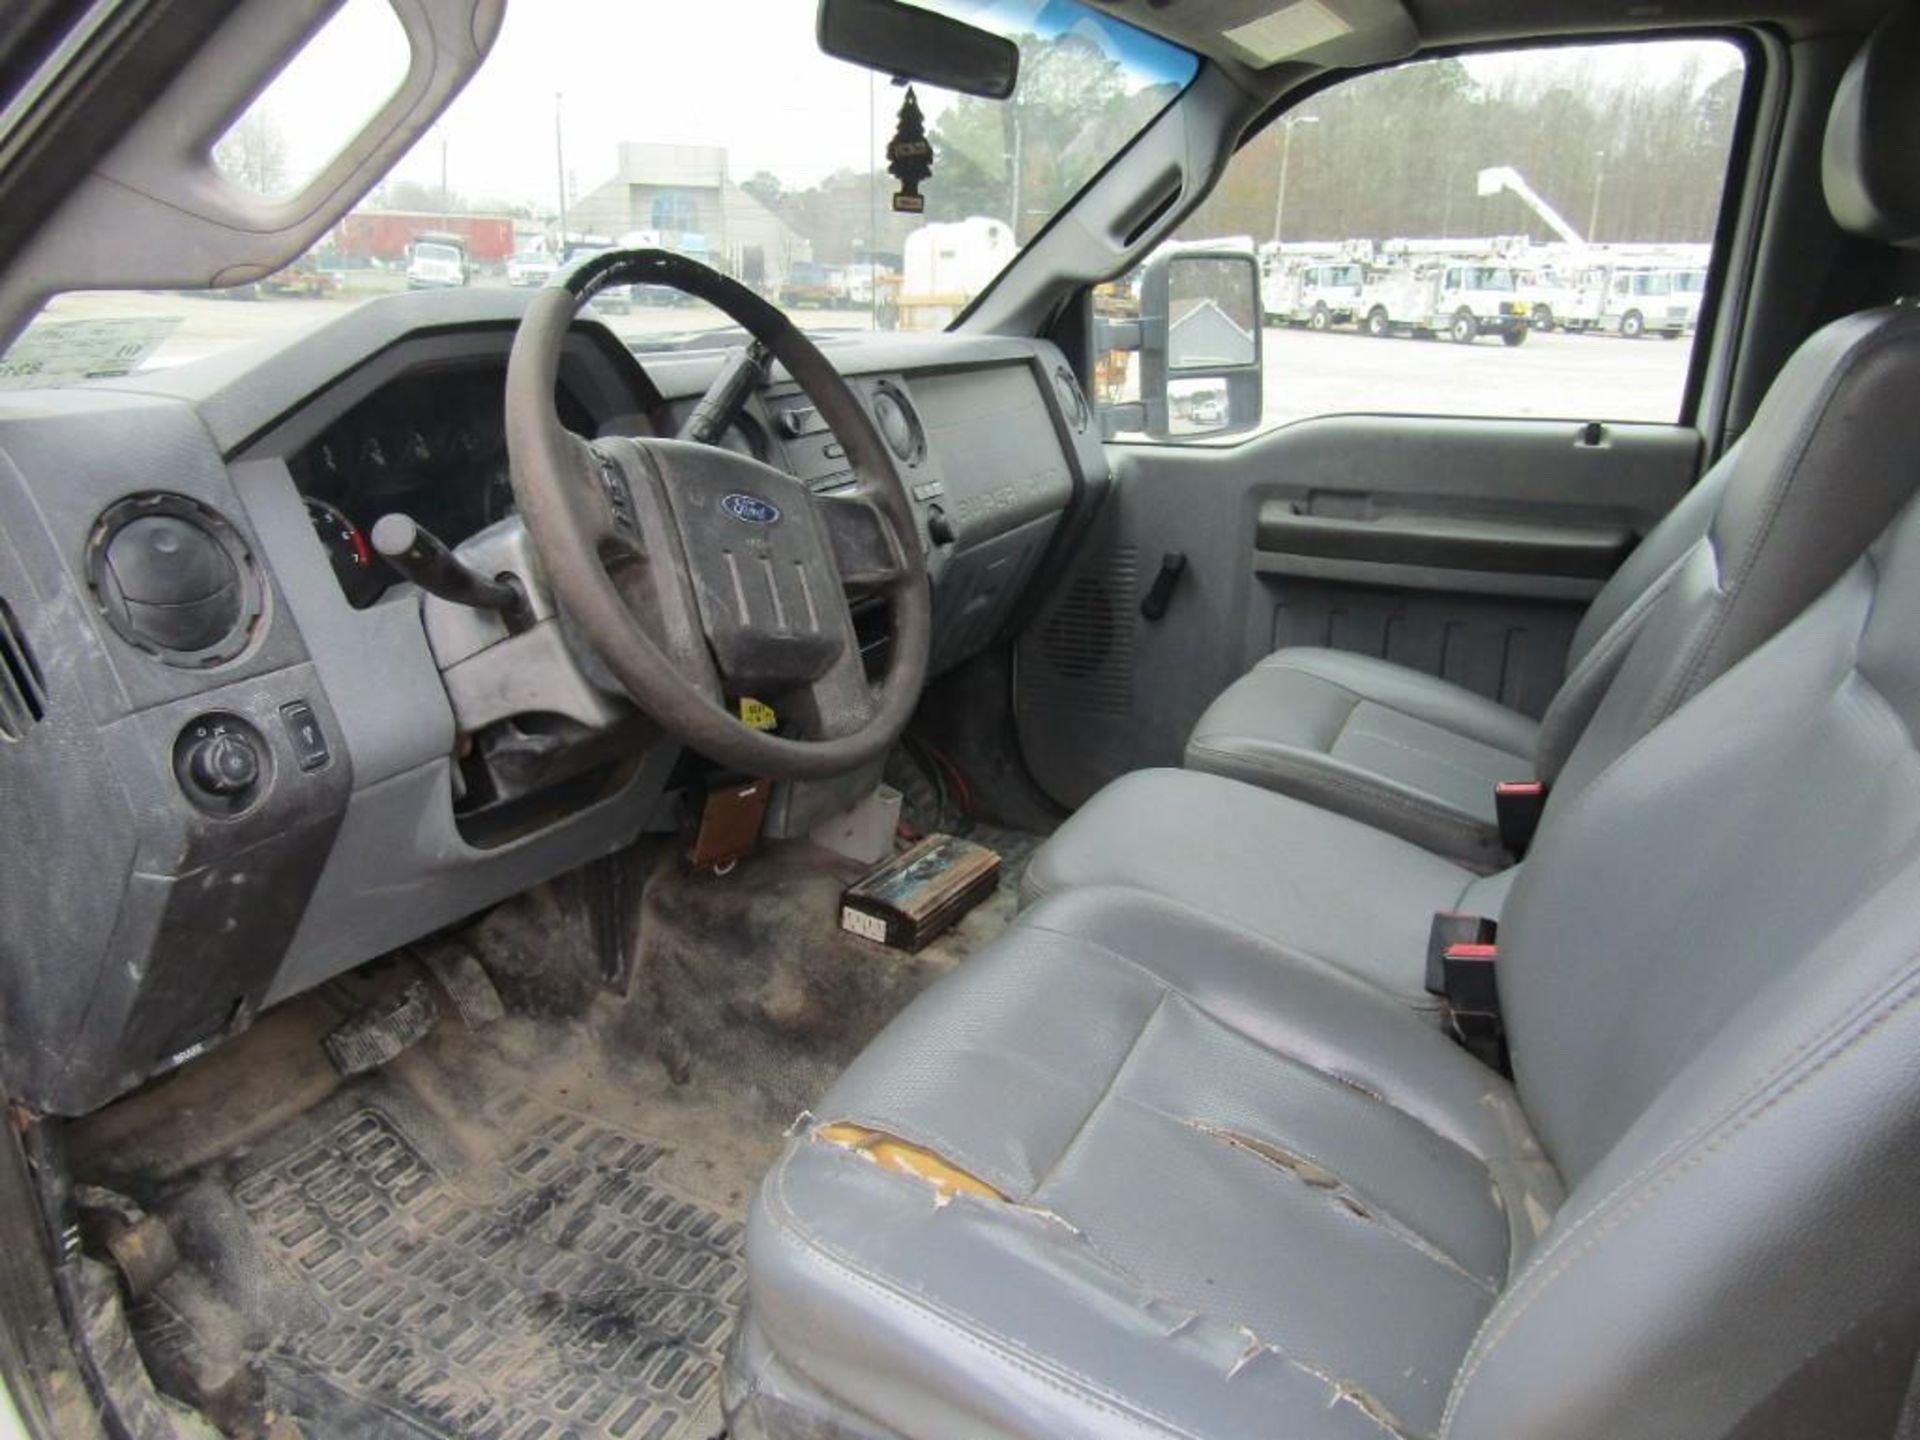 2011 Ford F350 4x4 Utility Truck - Image 8 of 27